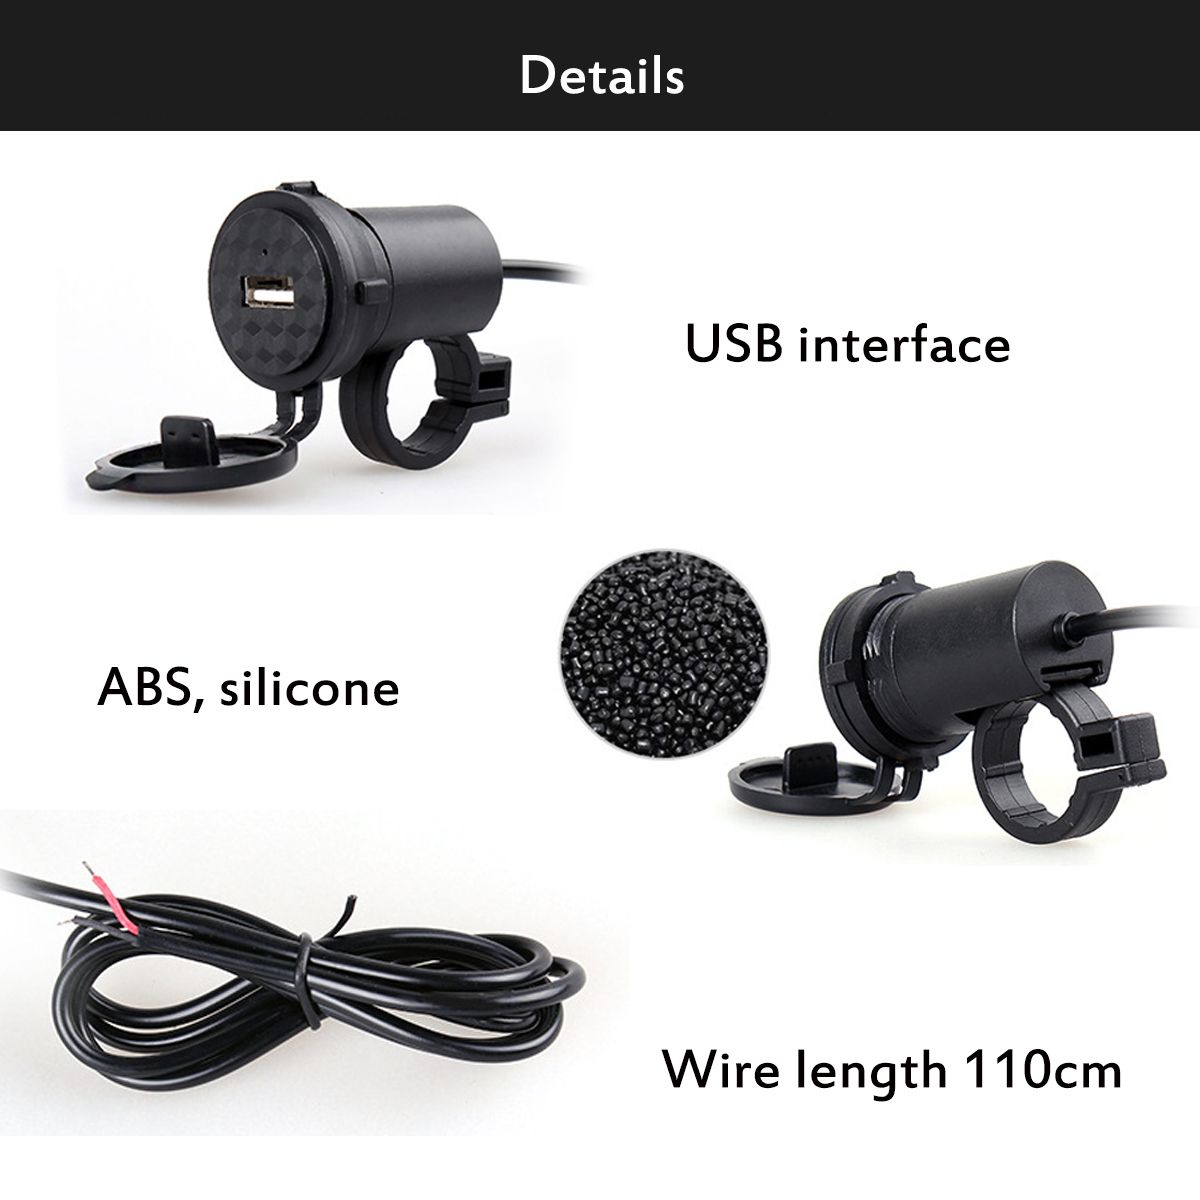 Waterproof-9-24V-Motorcycle-Mobile-Phone-USB-Charger-21A-Power-Adapter-Socket-1377708